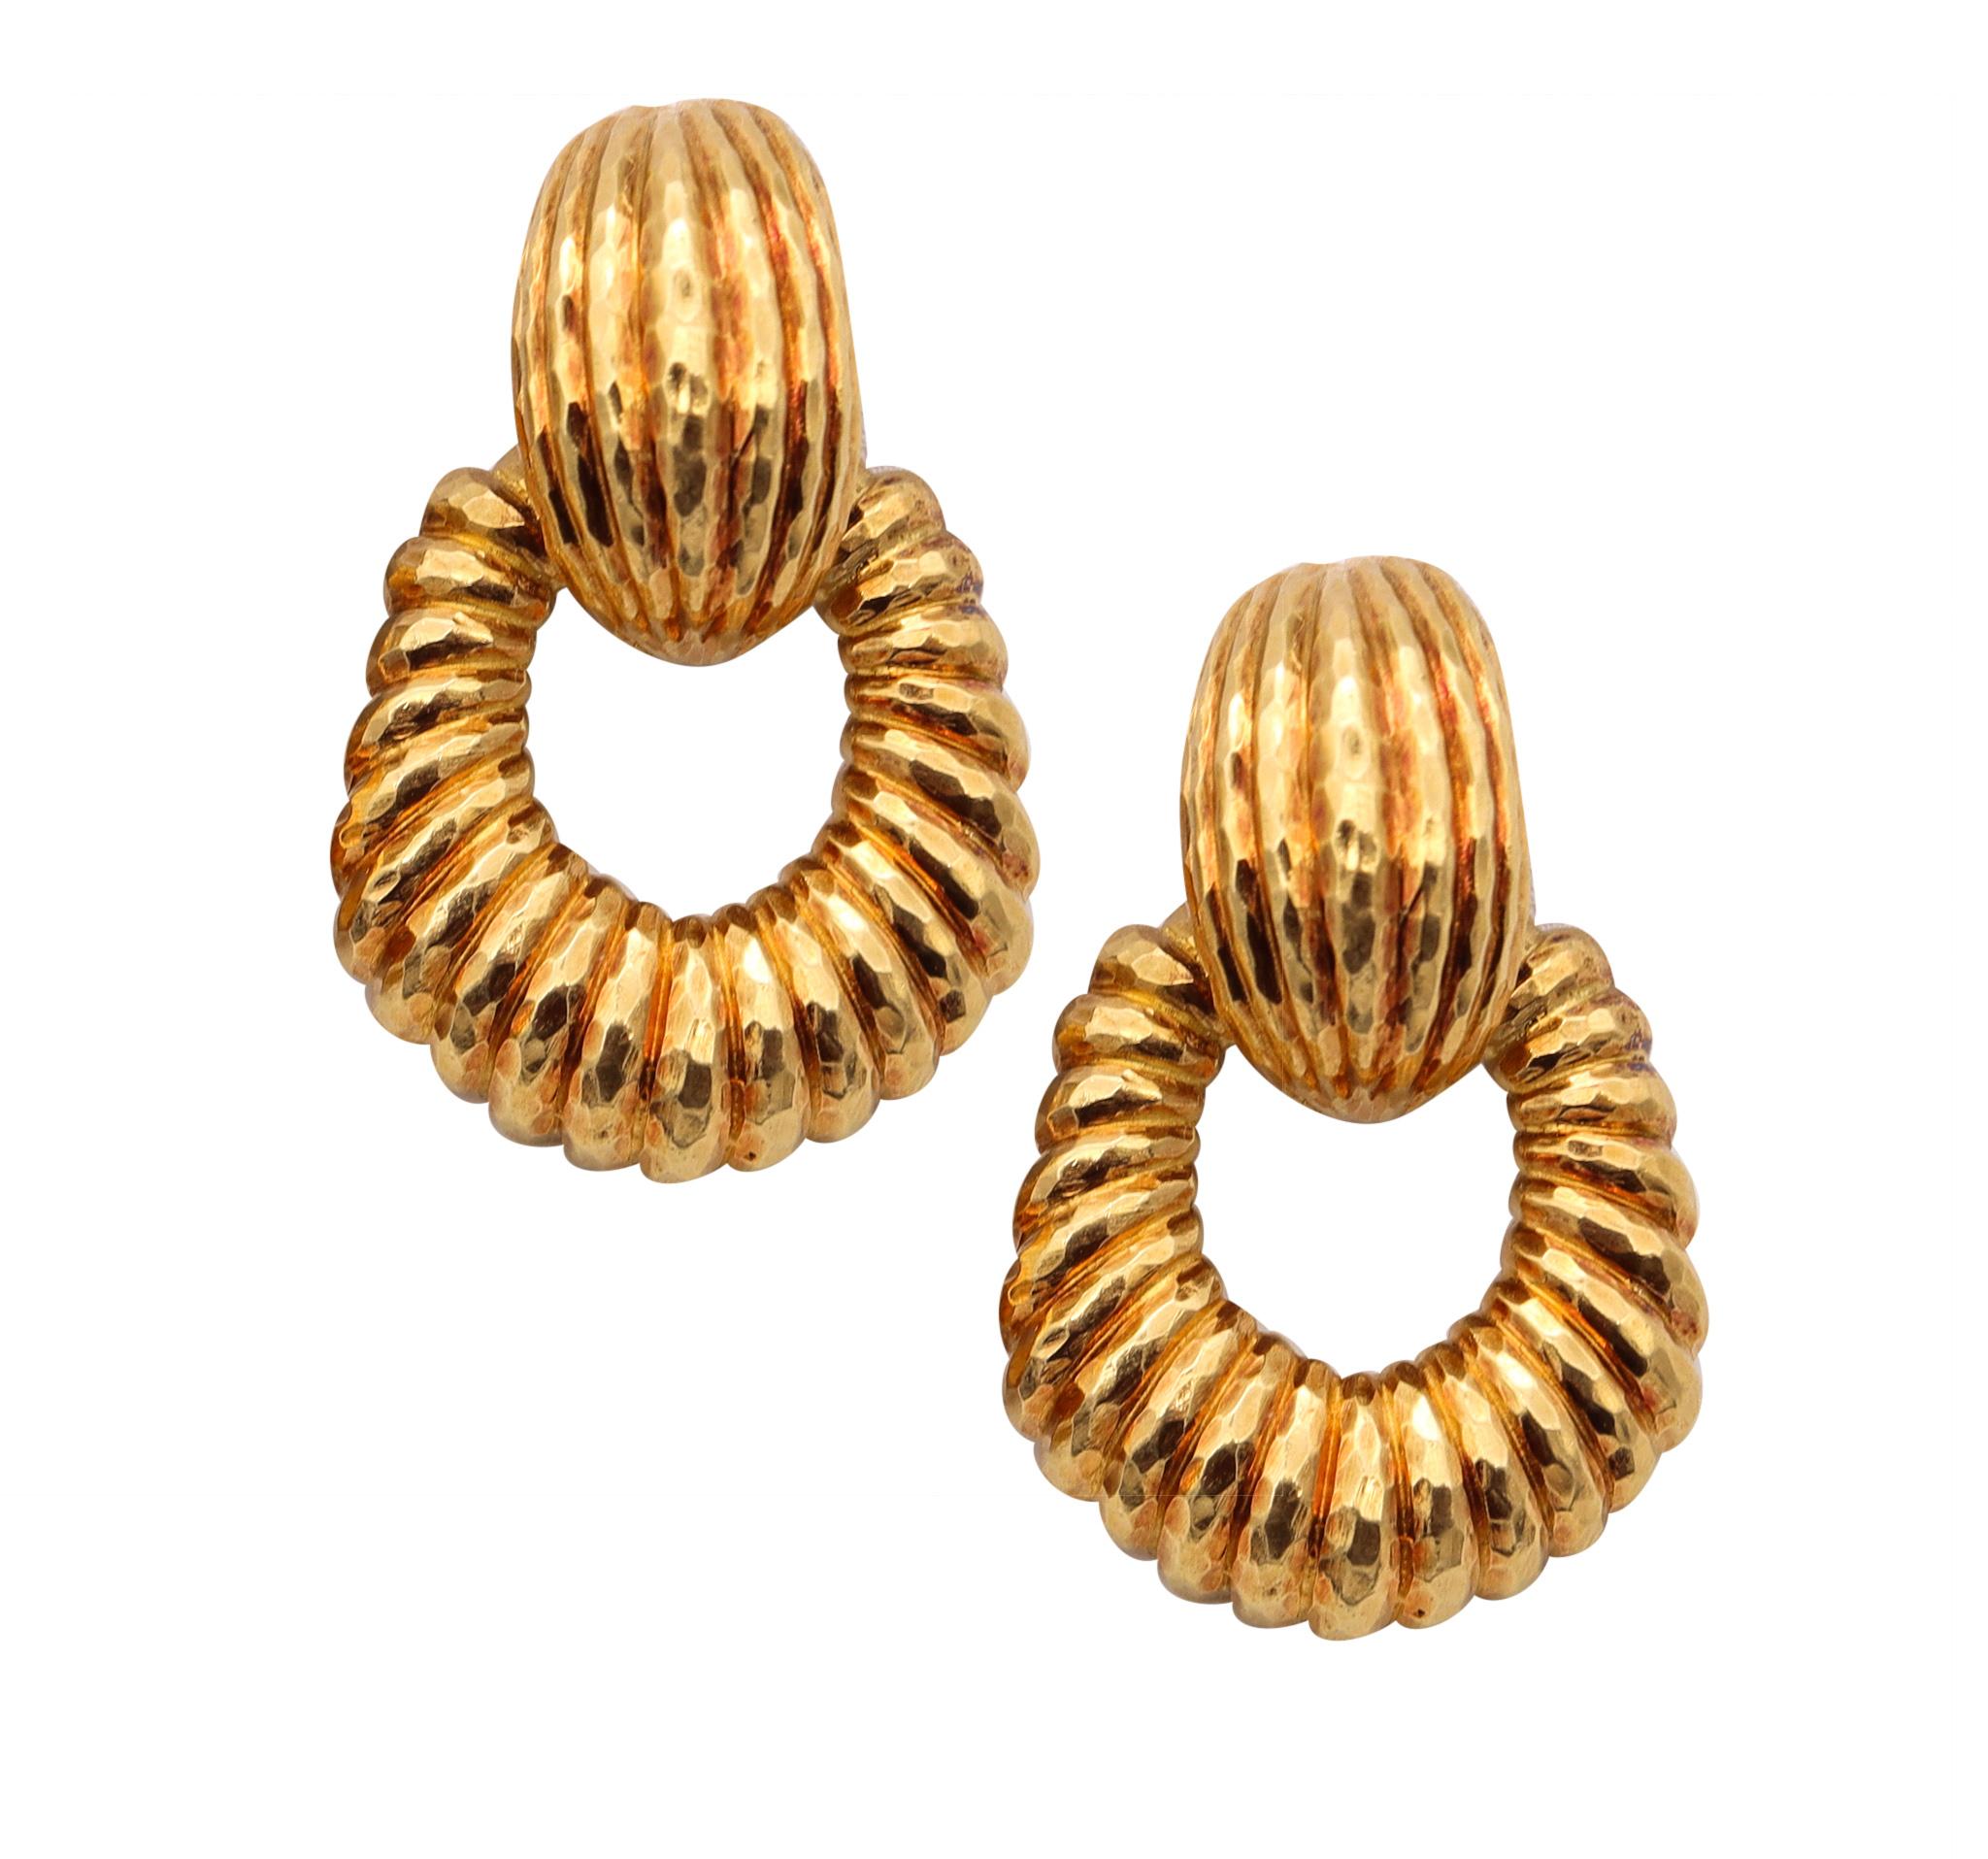 Door knocker earrings designed by David Webb (1925-1975).

Beautiful traditional pair, created in New York City at the jewelry atelier of David Webb, back in the 1970's. These classic door knockers drop earrings has been crafted in solid yellow gold